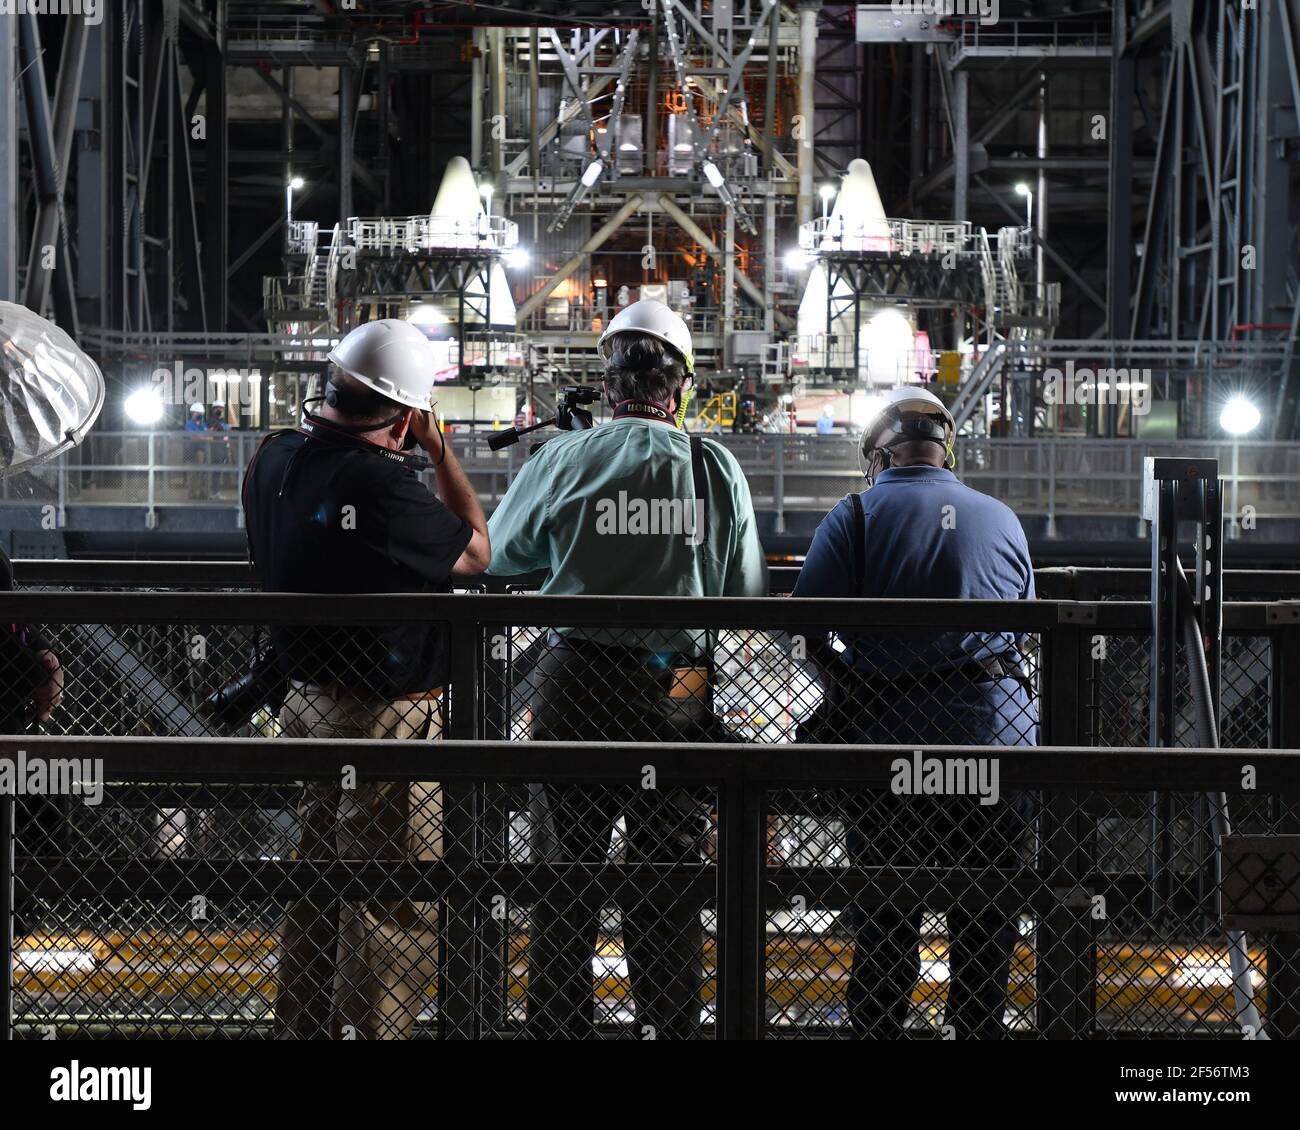 Kennedy Space Center, United States. 24th Mar, 2021. Inside the Vehicle Assembly Building, photographers take images of the stacked solid rocket boosters of NASA's Space Launch System (SLS) rocket at the Kennedy Space Center, Florida on Wednesday, March 24, 2021. Photo by Joe Marino/UPI Credit: UPI/Alamy Live News Stock Photo